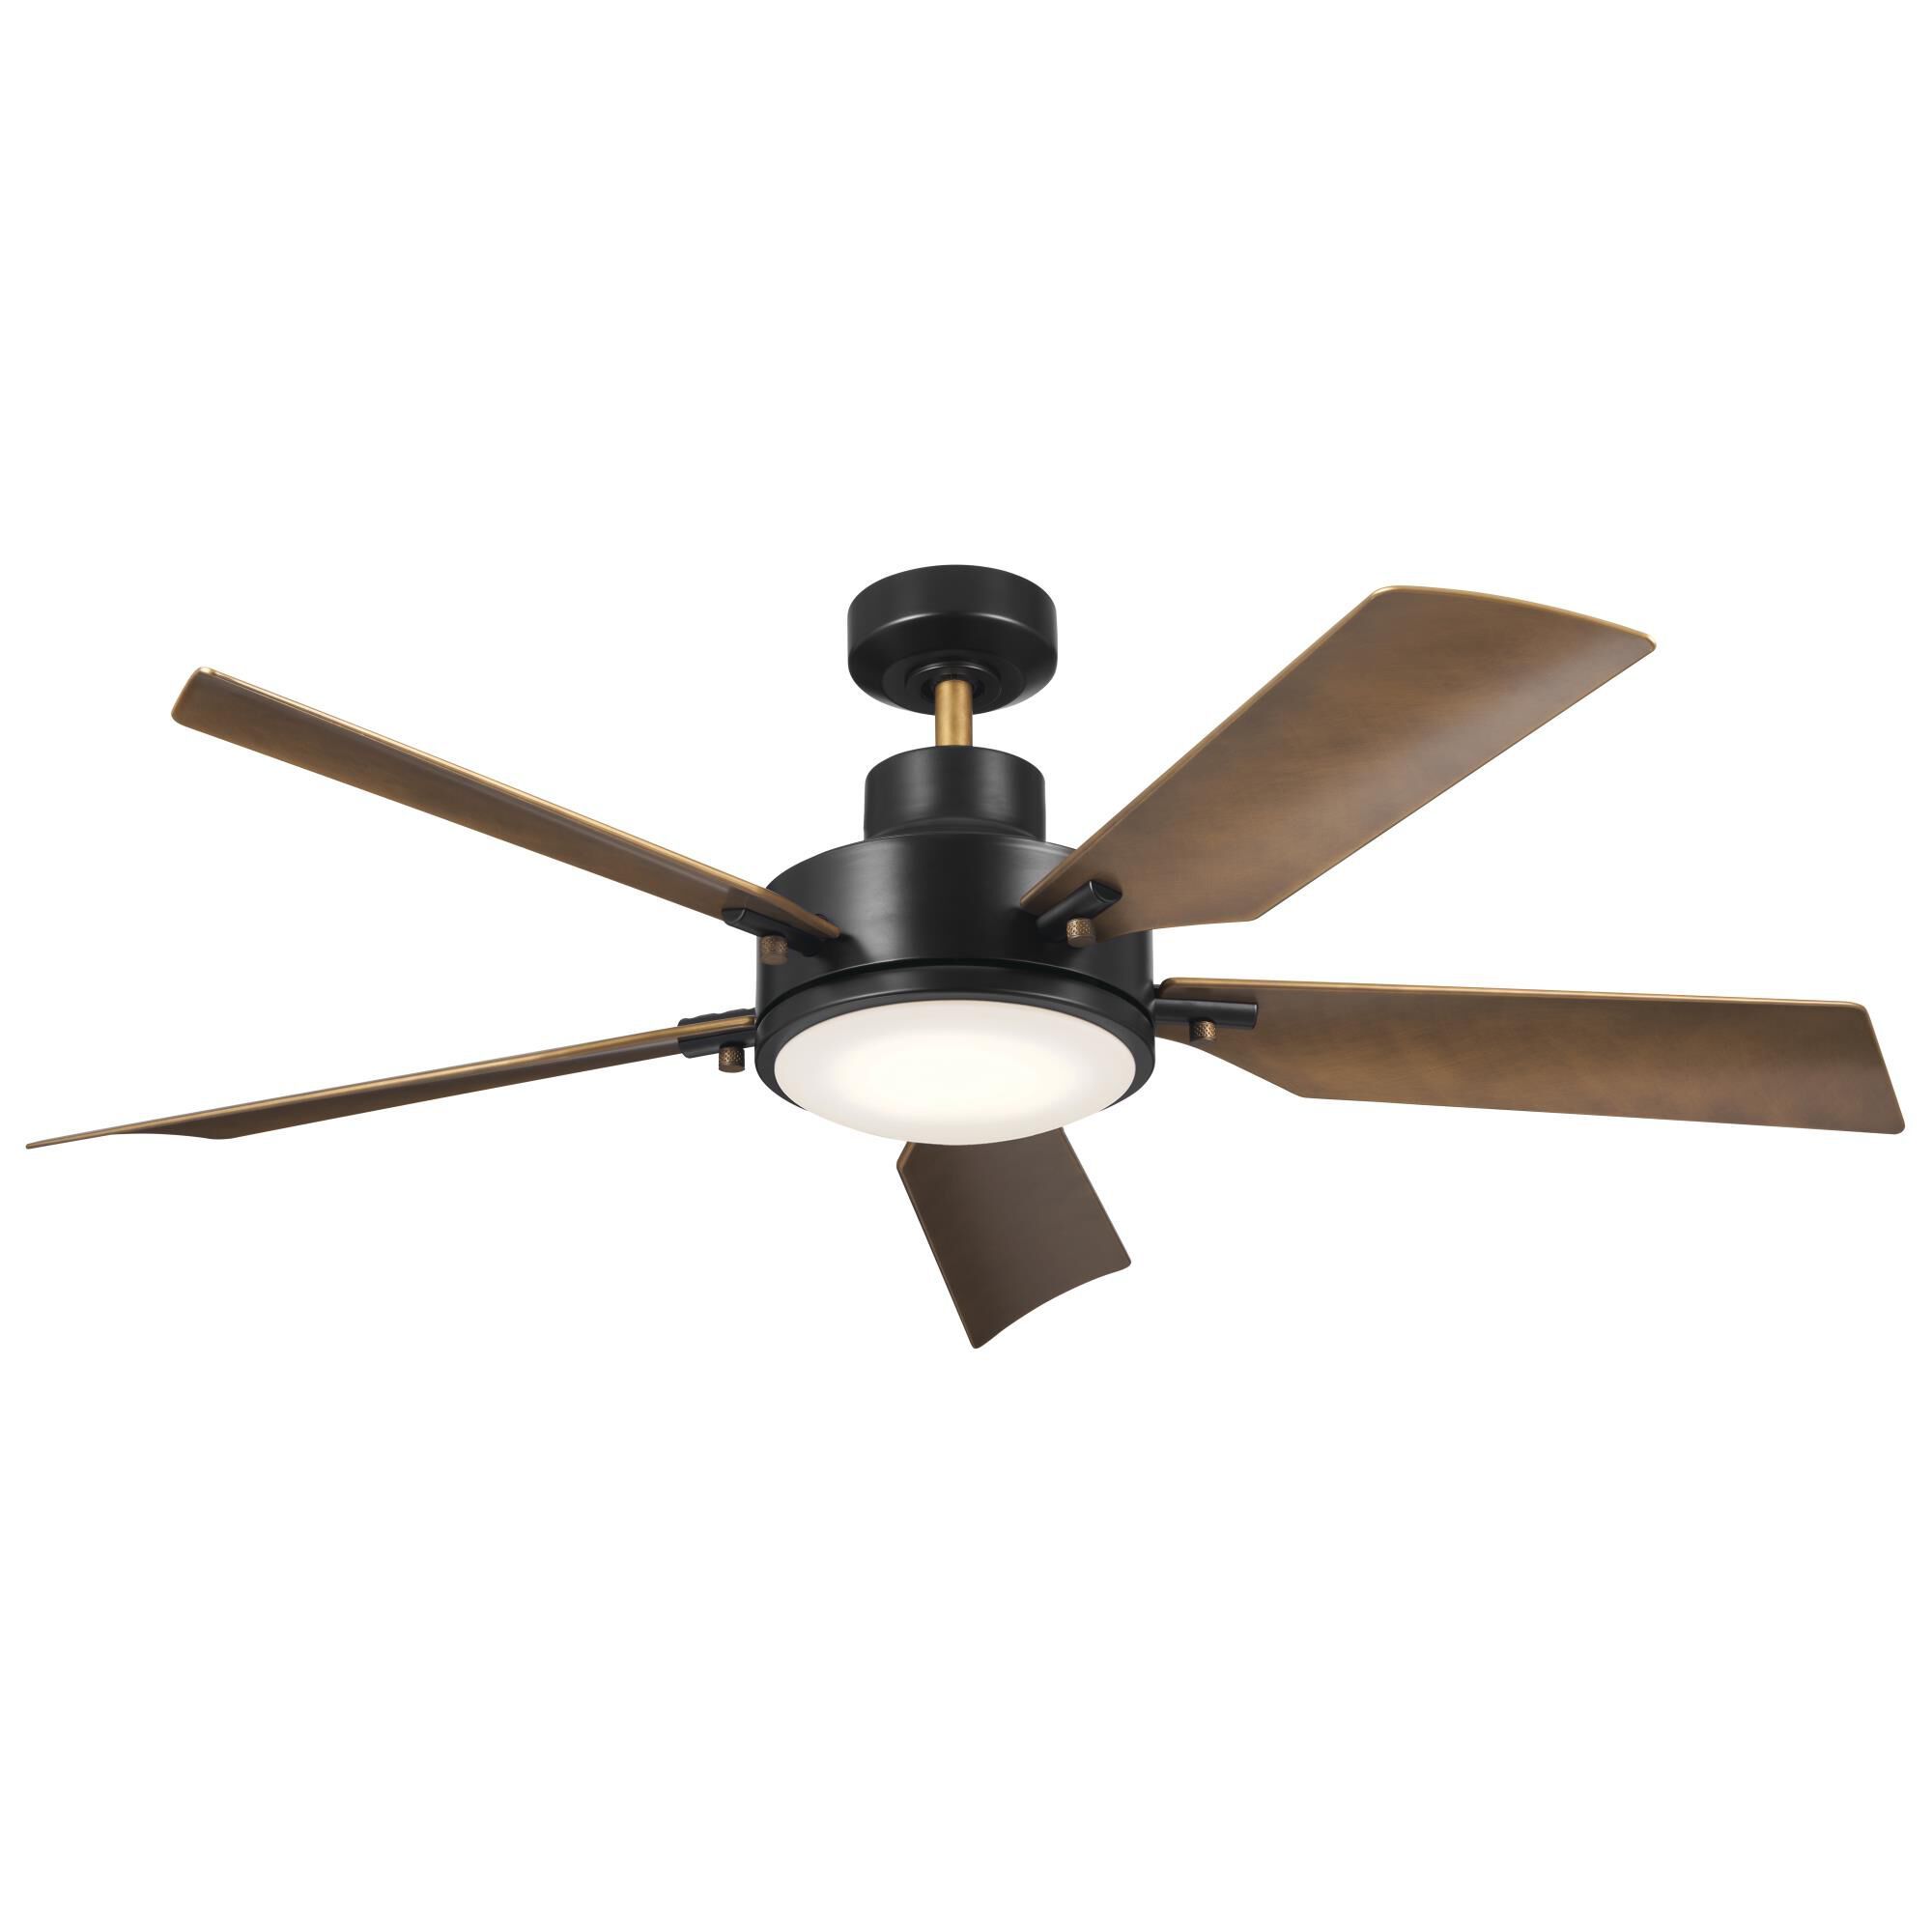 Guardian 54 Inch Ceiling Fan with Light Kit by Kichler Lighting | 1800 Lighting